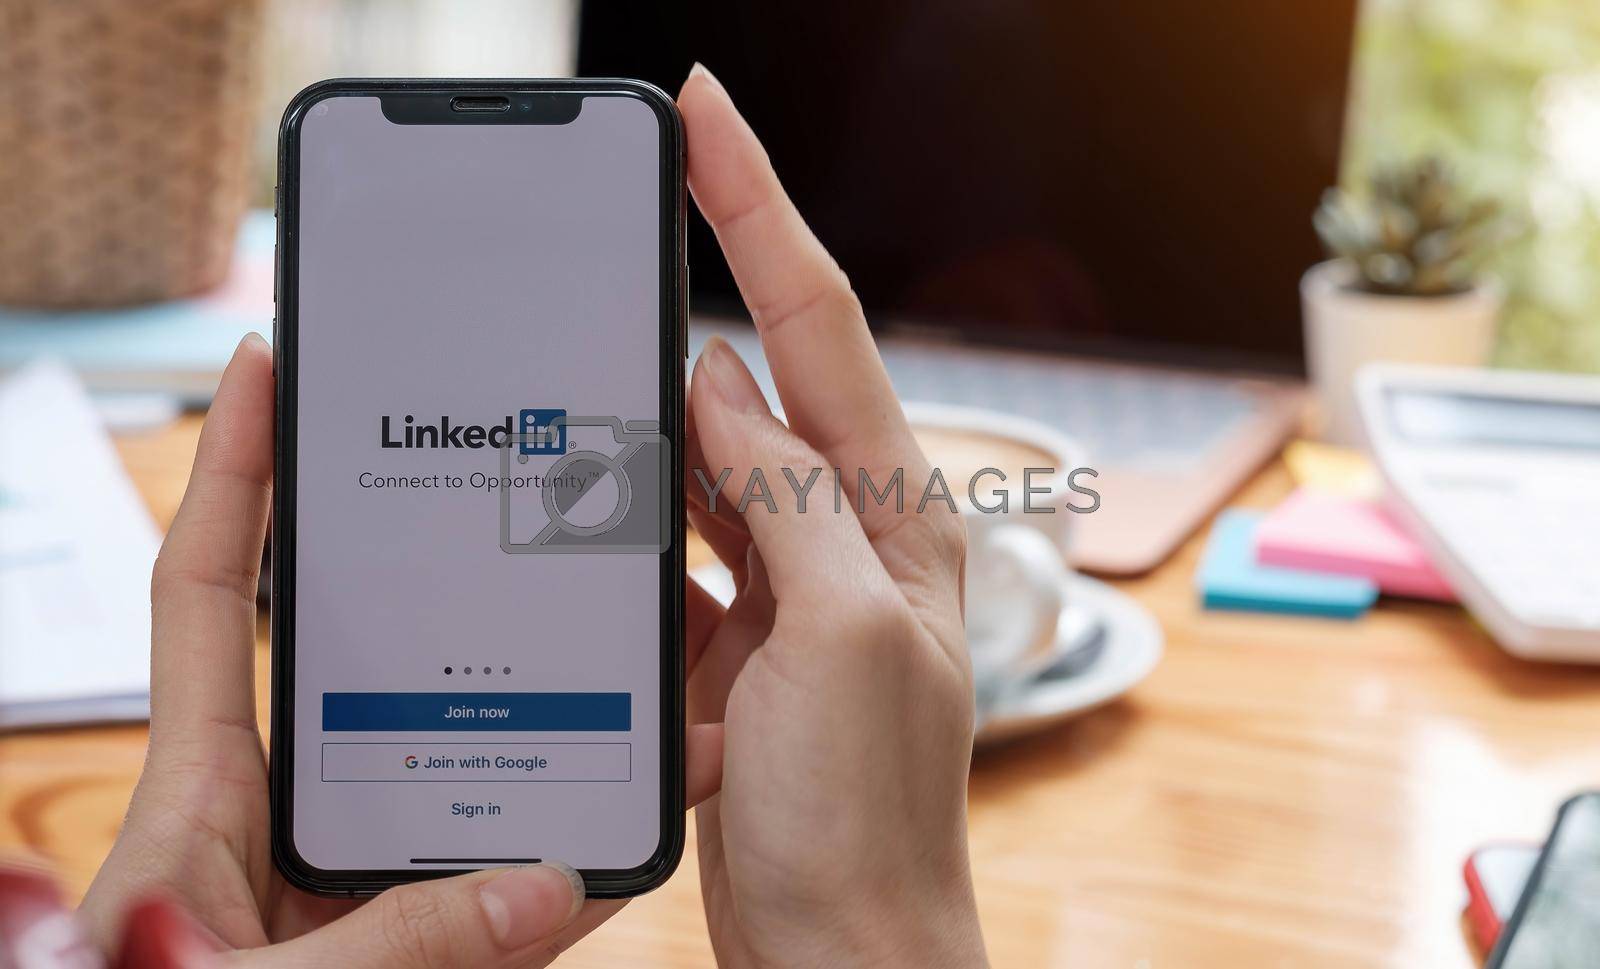 CHIANG MAI, THAILAND, DEC 12, 2020 : A women holds Apple iPhone Xs with LinkedIn application on the screen.LinkedIn is a photo-sharing app for smartphones..